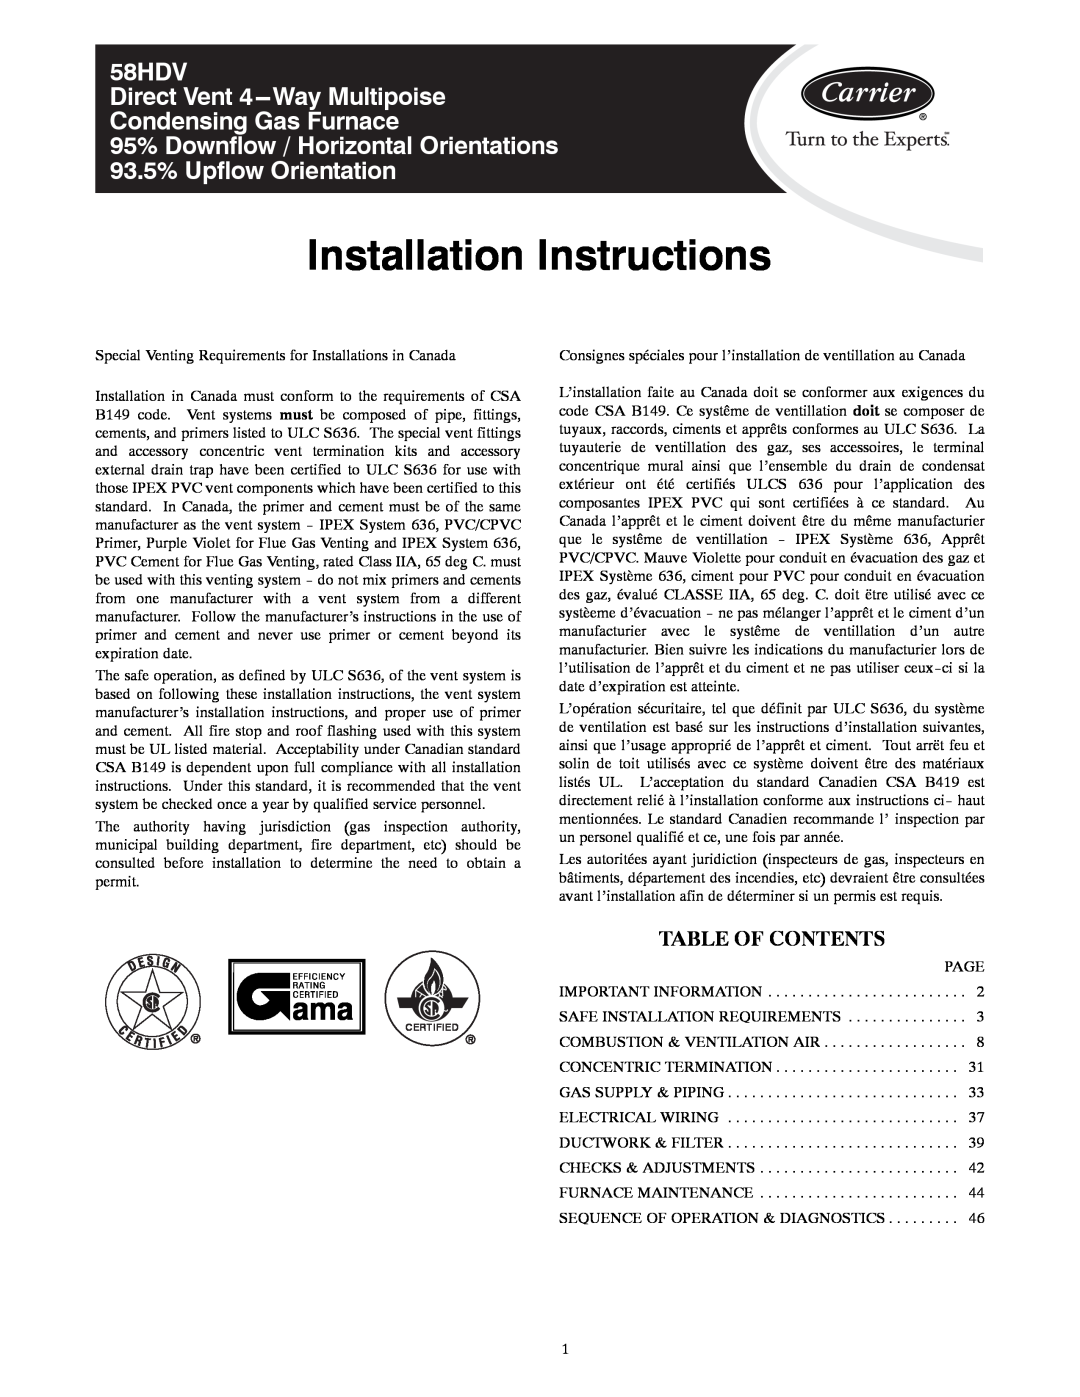 Carrier installation instructions Table Of Contents, Installation Instructions, 58HDV Direct Vent 4---WayMultipoise 